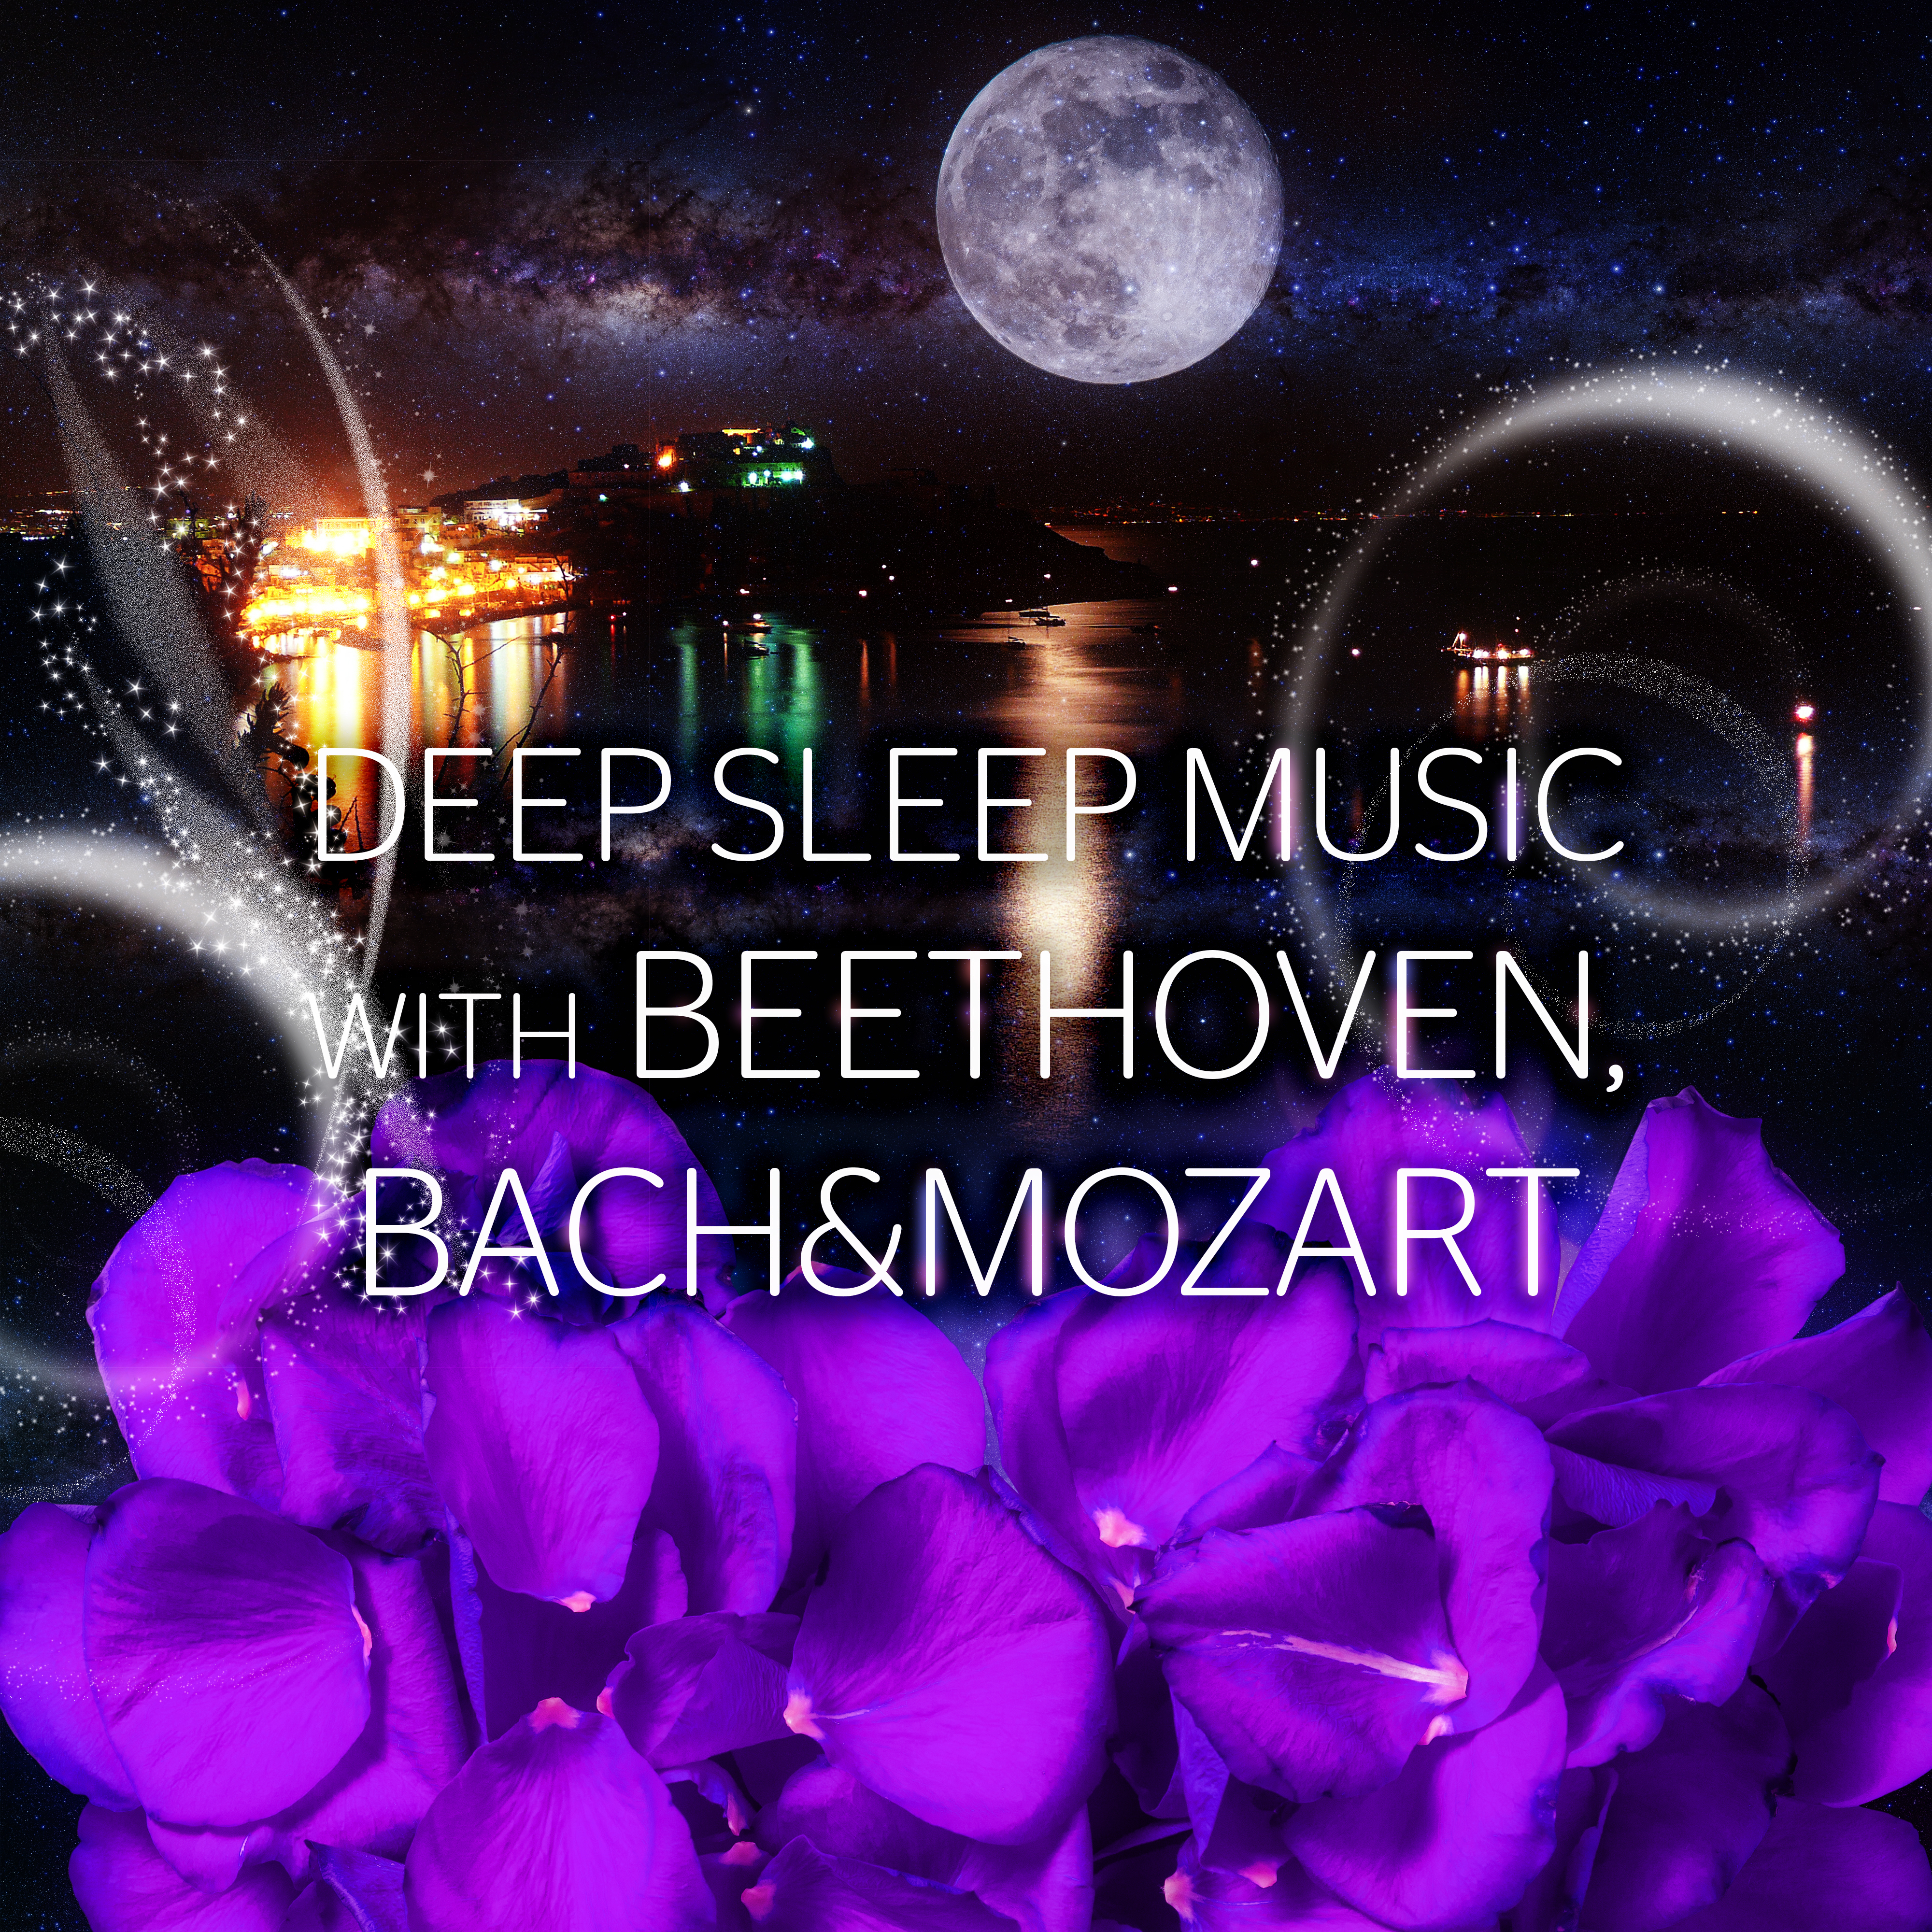 Deep Sleep Music with Beethoven, Bach, Mozart – Deep Sleep Music Therapy, Long Sleeping Songs to Help You Relax, Peaceful Music for Stress Relief